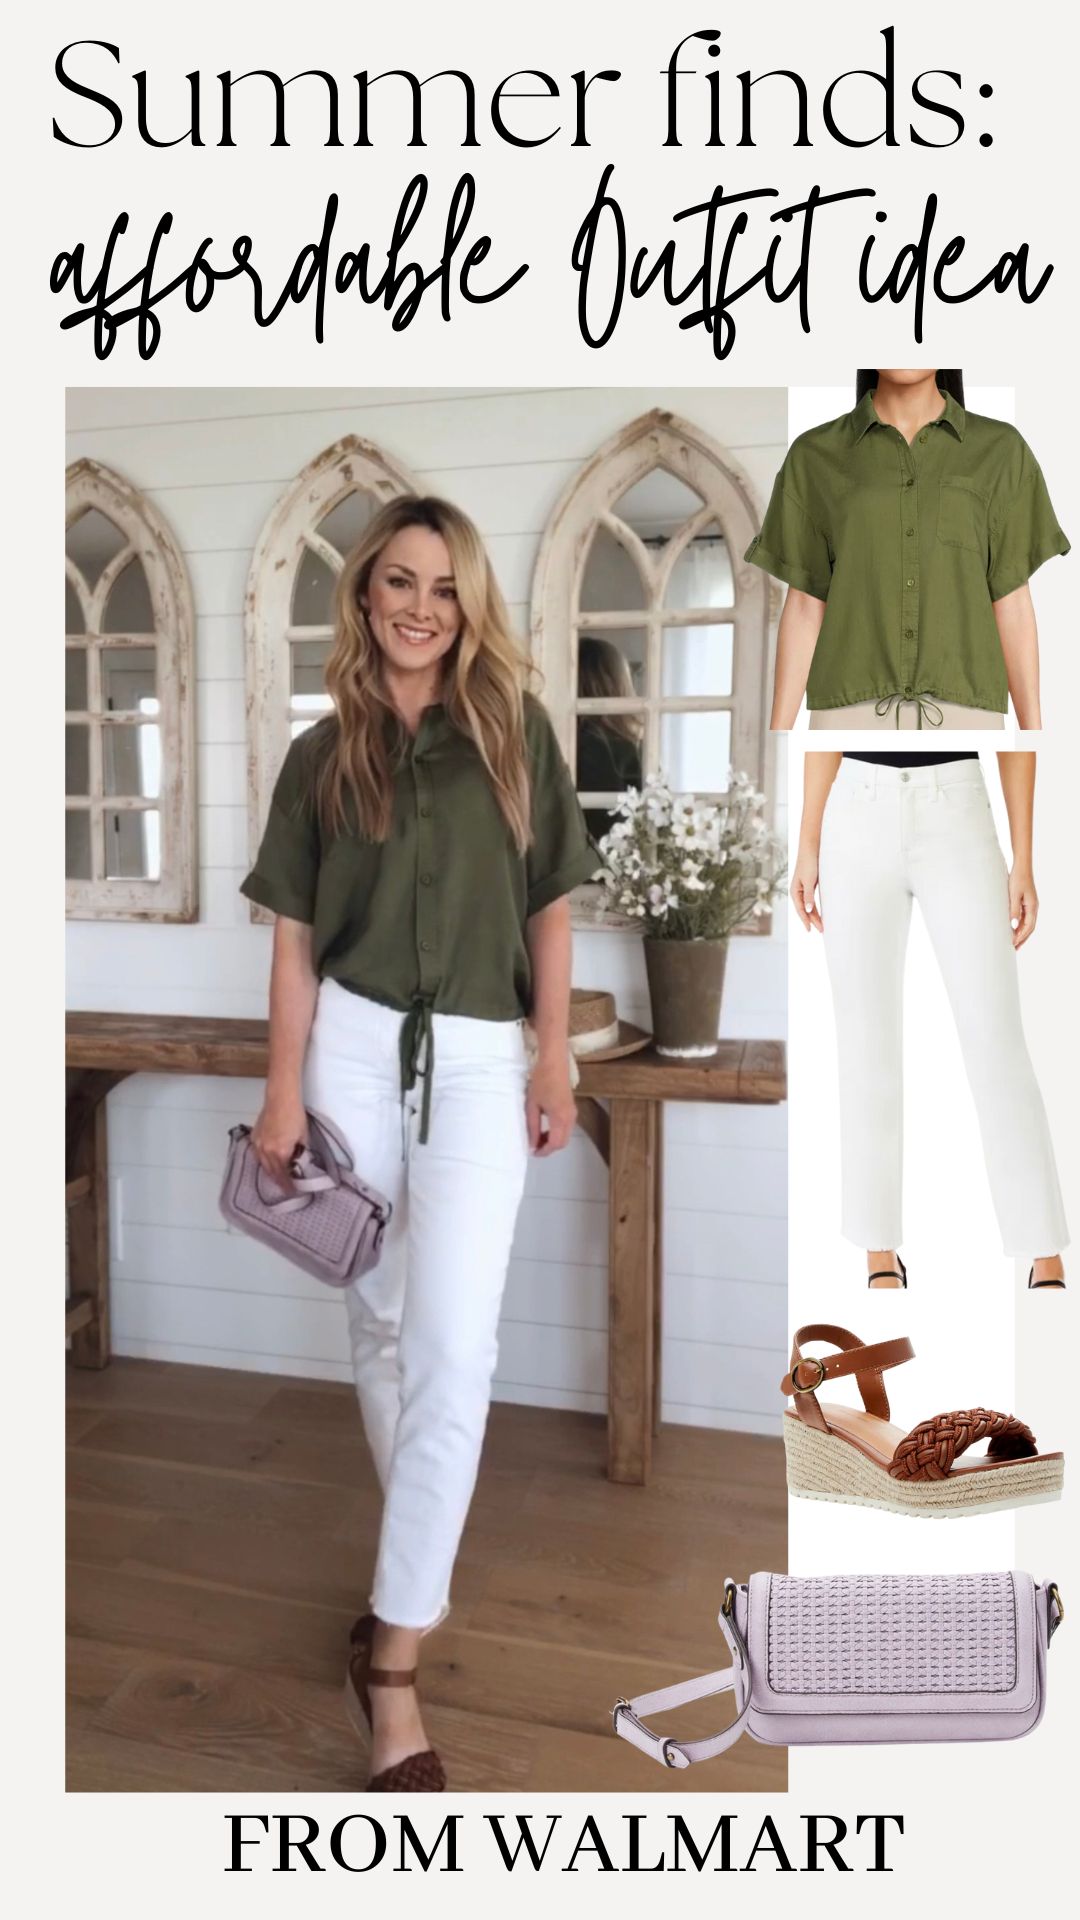 Affordable summer styles from Walmart. Green cargo top, white pants and braided wedges